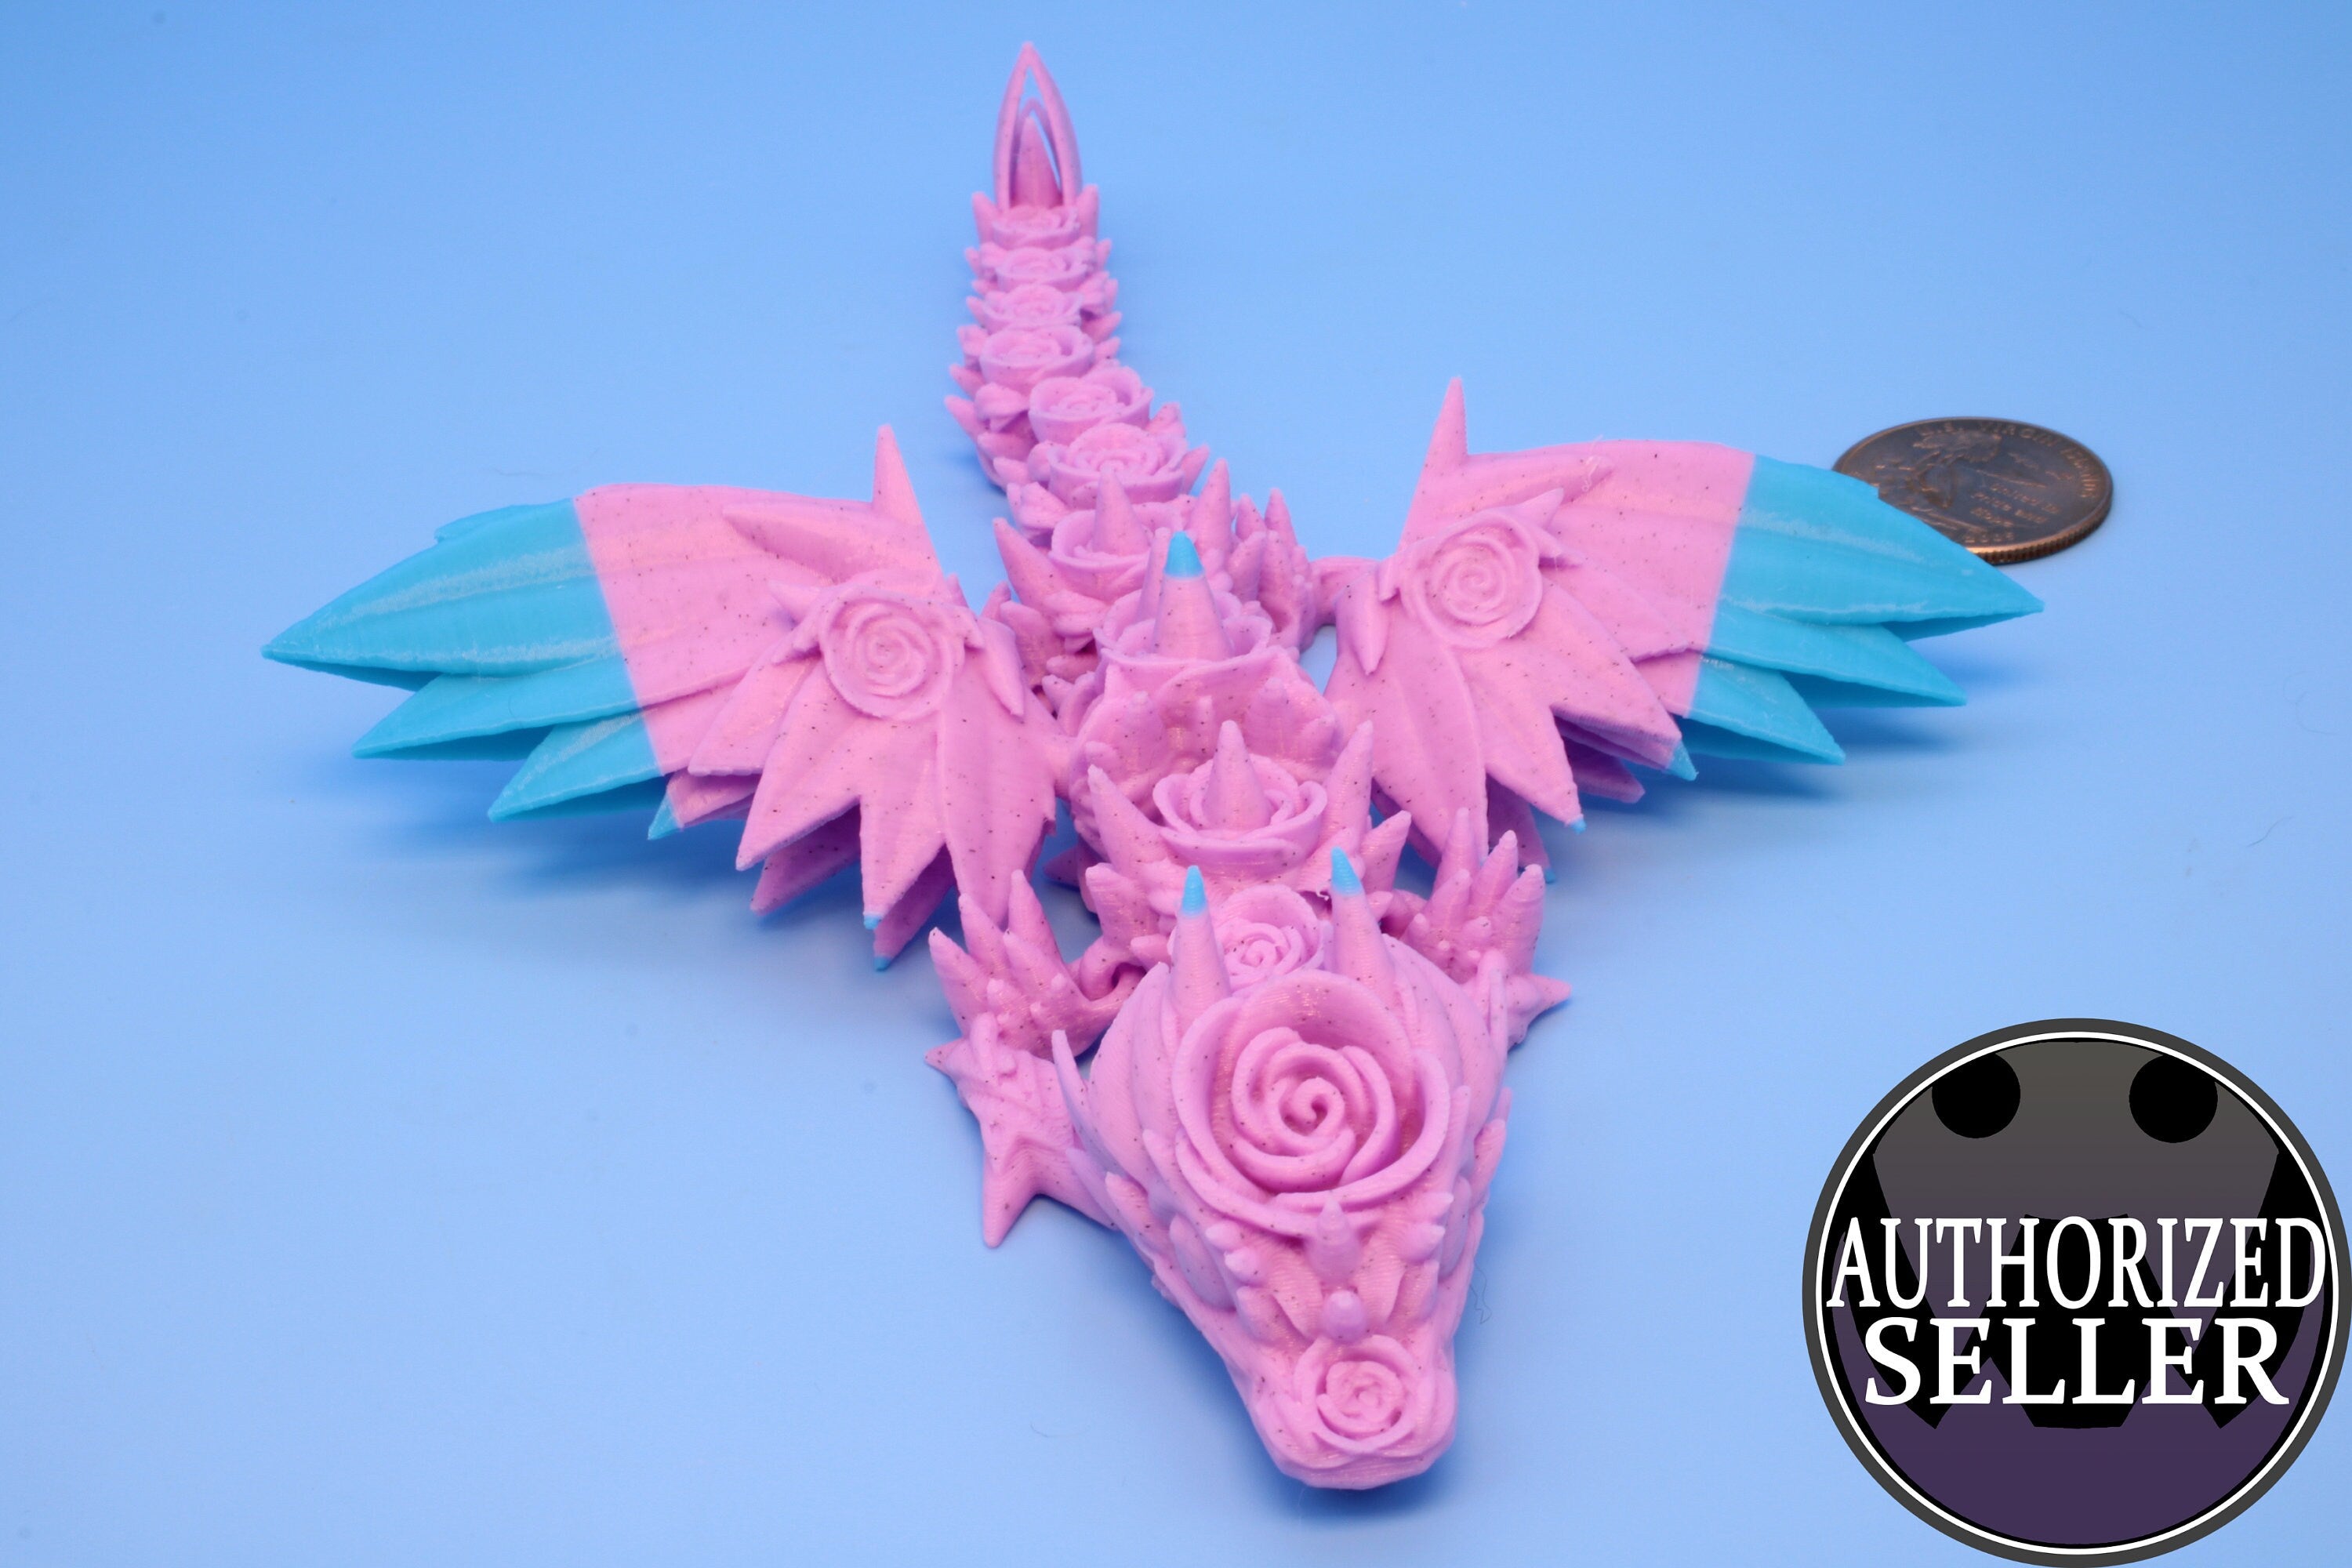 Miniature Baby Rose Wing Dragon, 3D Printed 7 in.